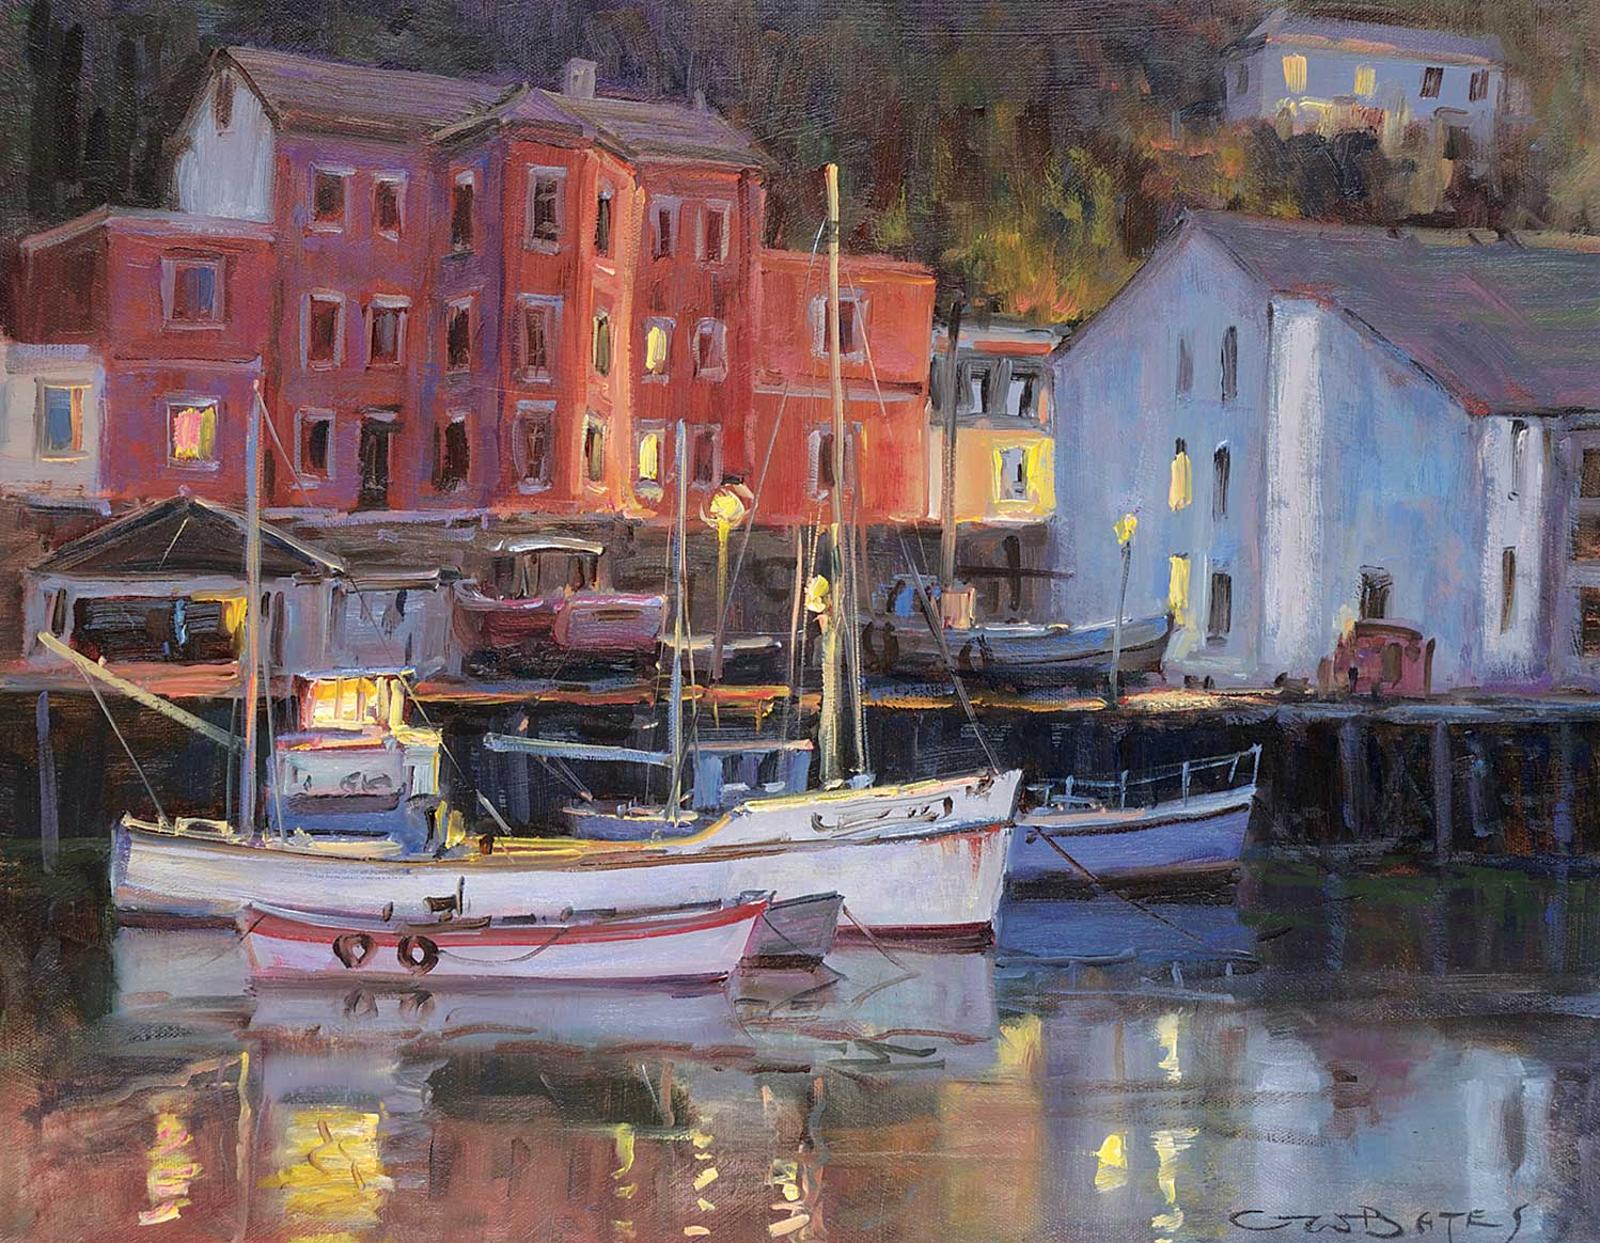 George William Bates (1930-2009) - Ilfracombe Harbour, Eng.